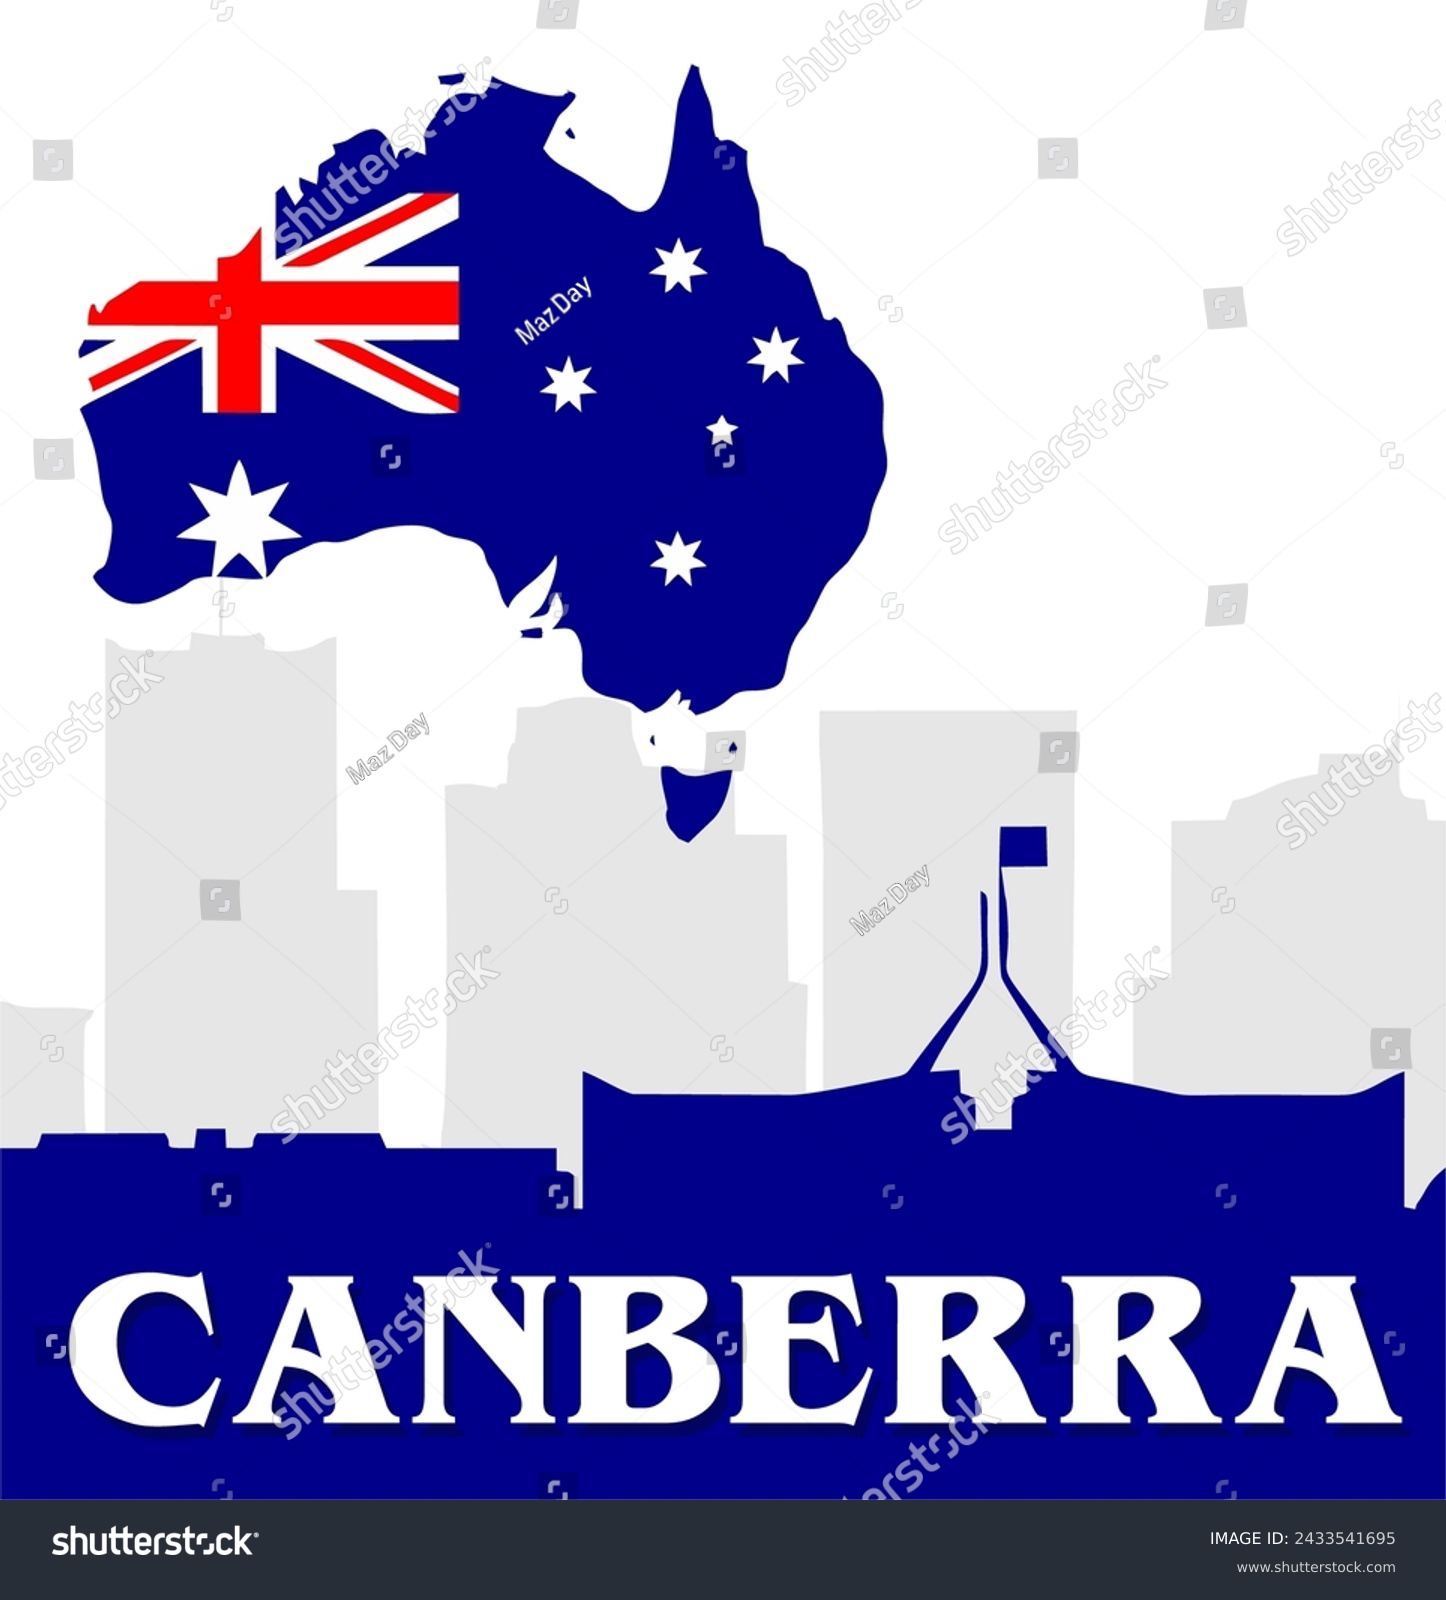 SVG of Happy Canberra Day Australia with beautiful view svg